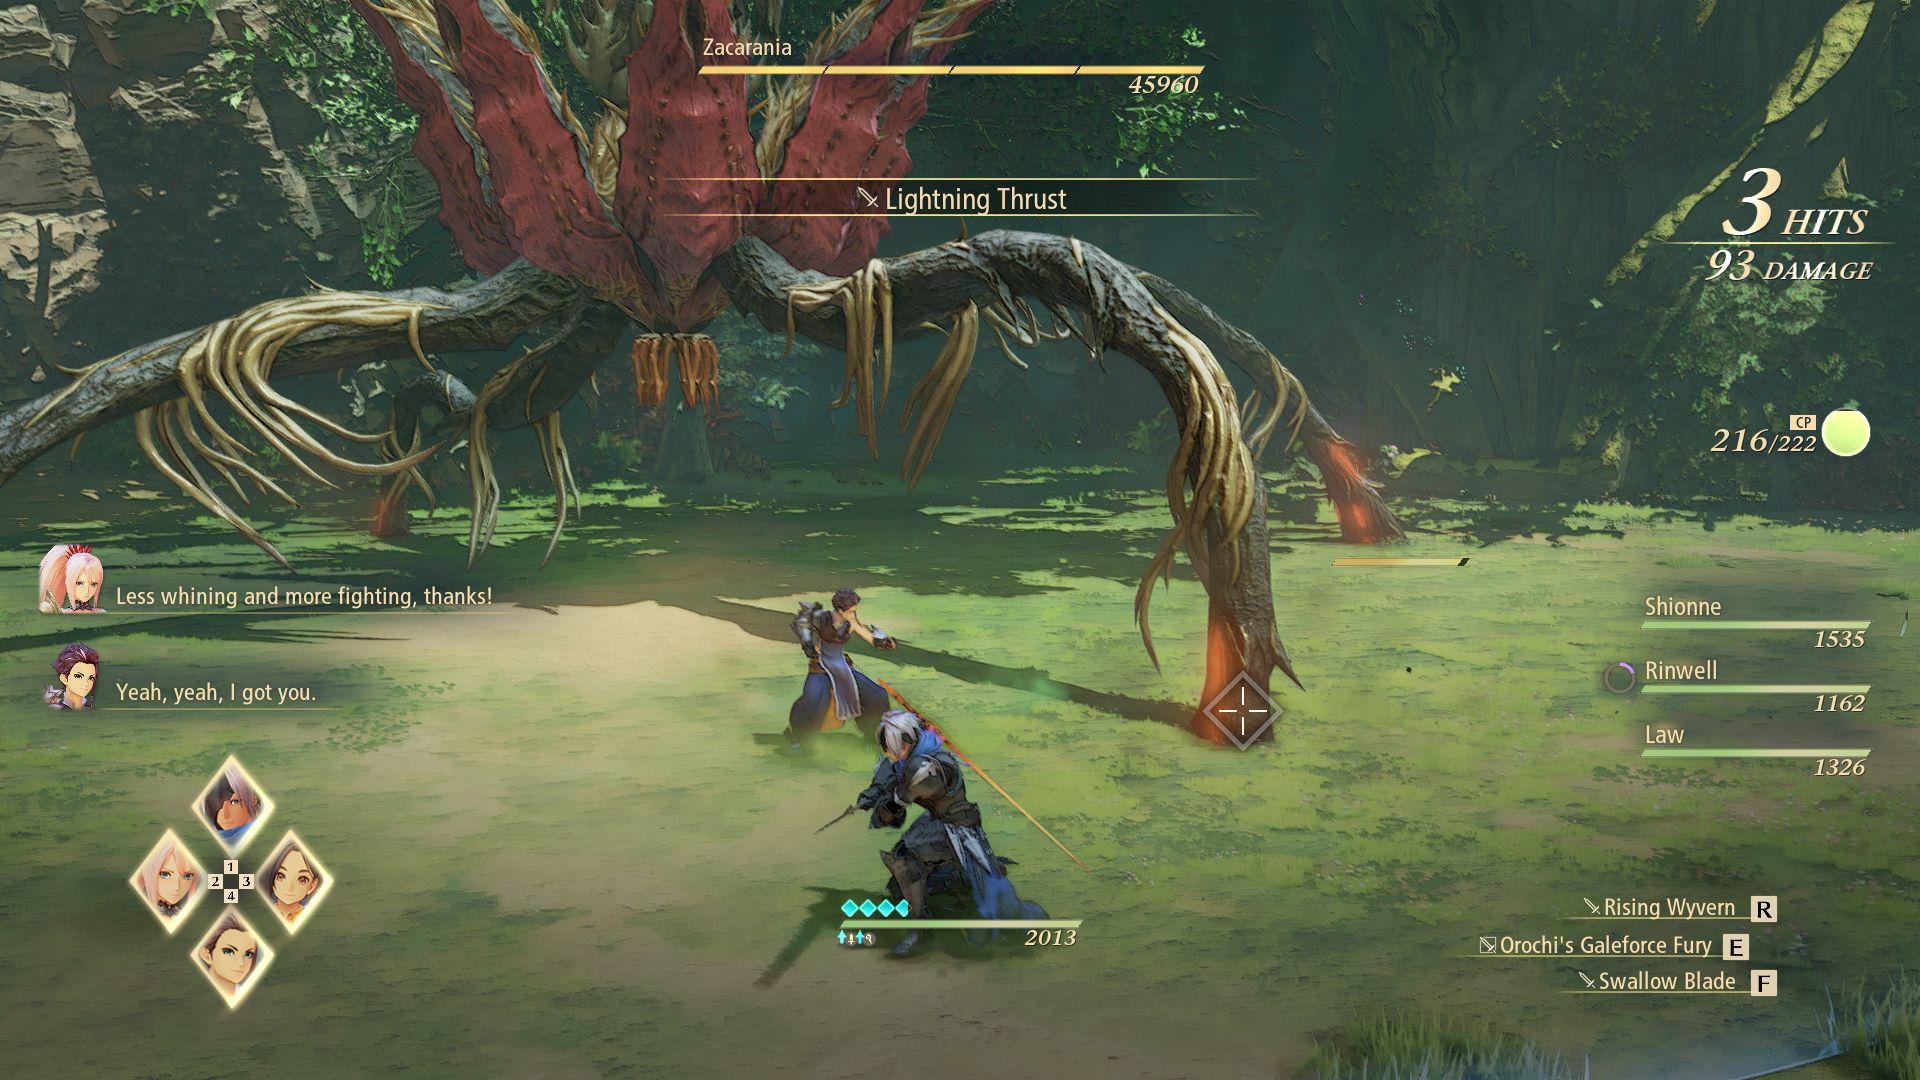 Tales of Arise review - character and combat make this an RPG epic to  savour